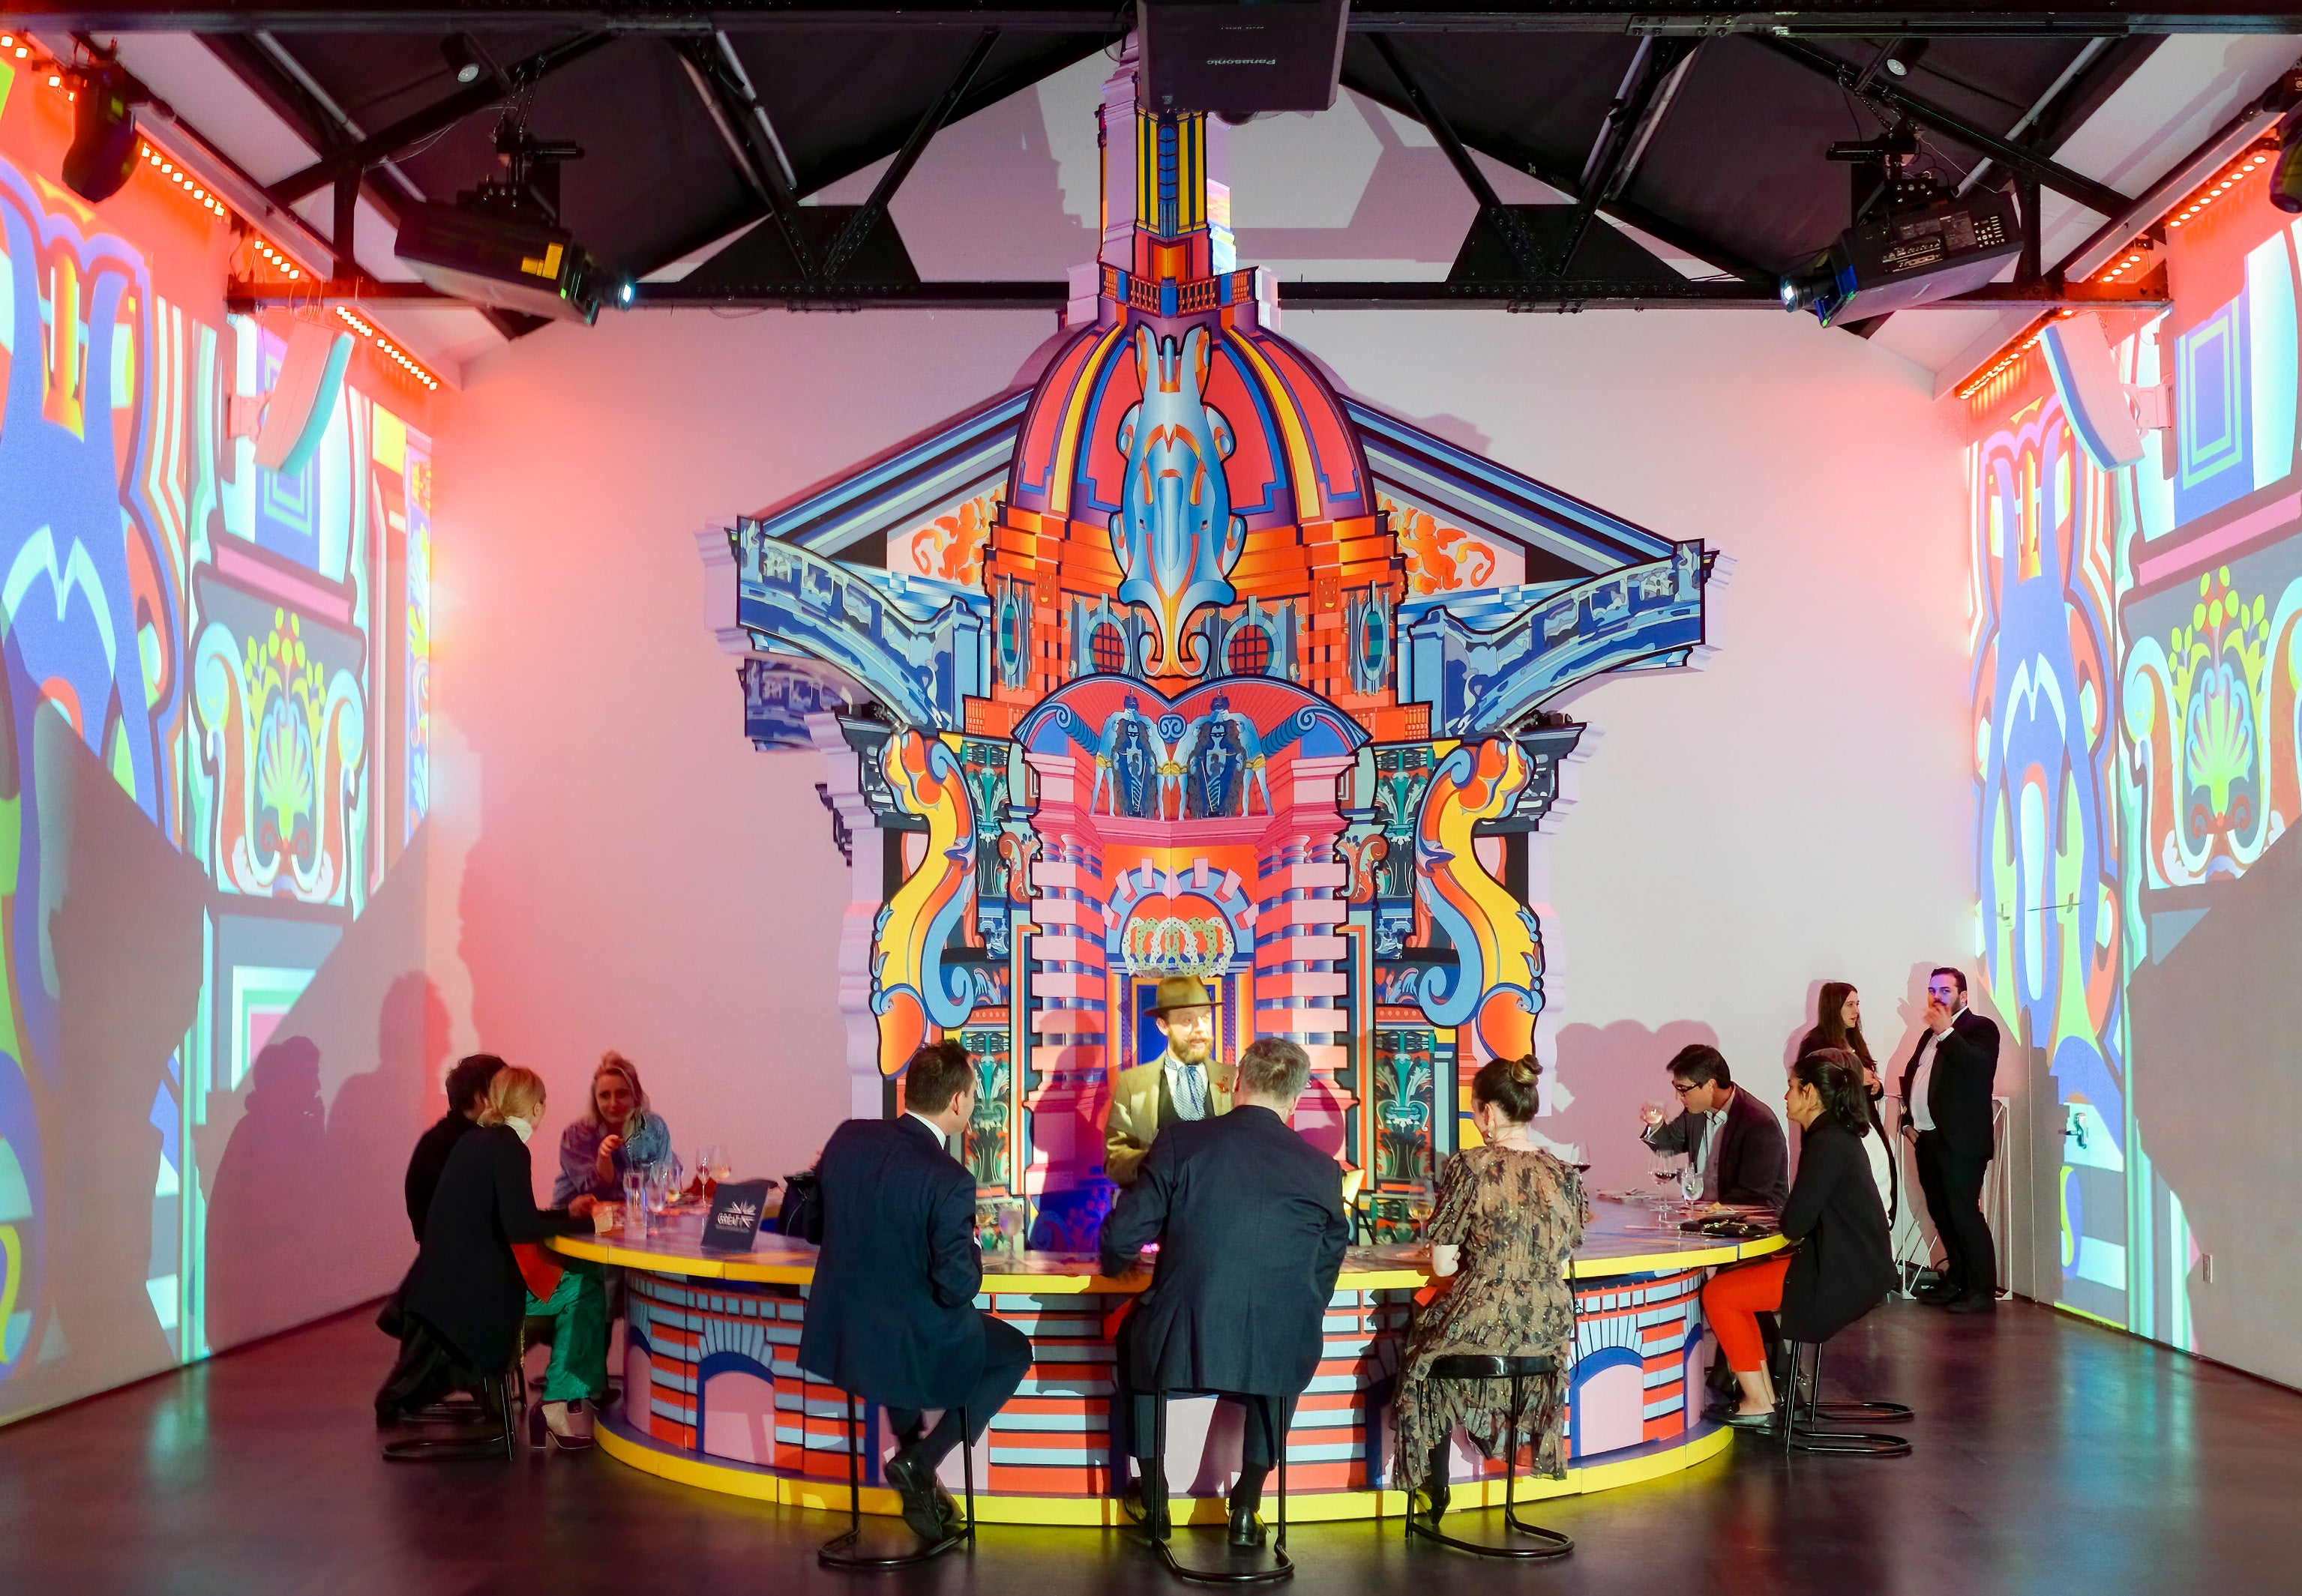 Cupola Britannica, Artificial Intelligence Dining Experience in New York by Atelier Adam Nathaniel Furman